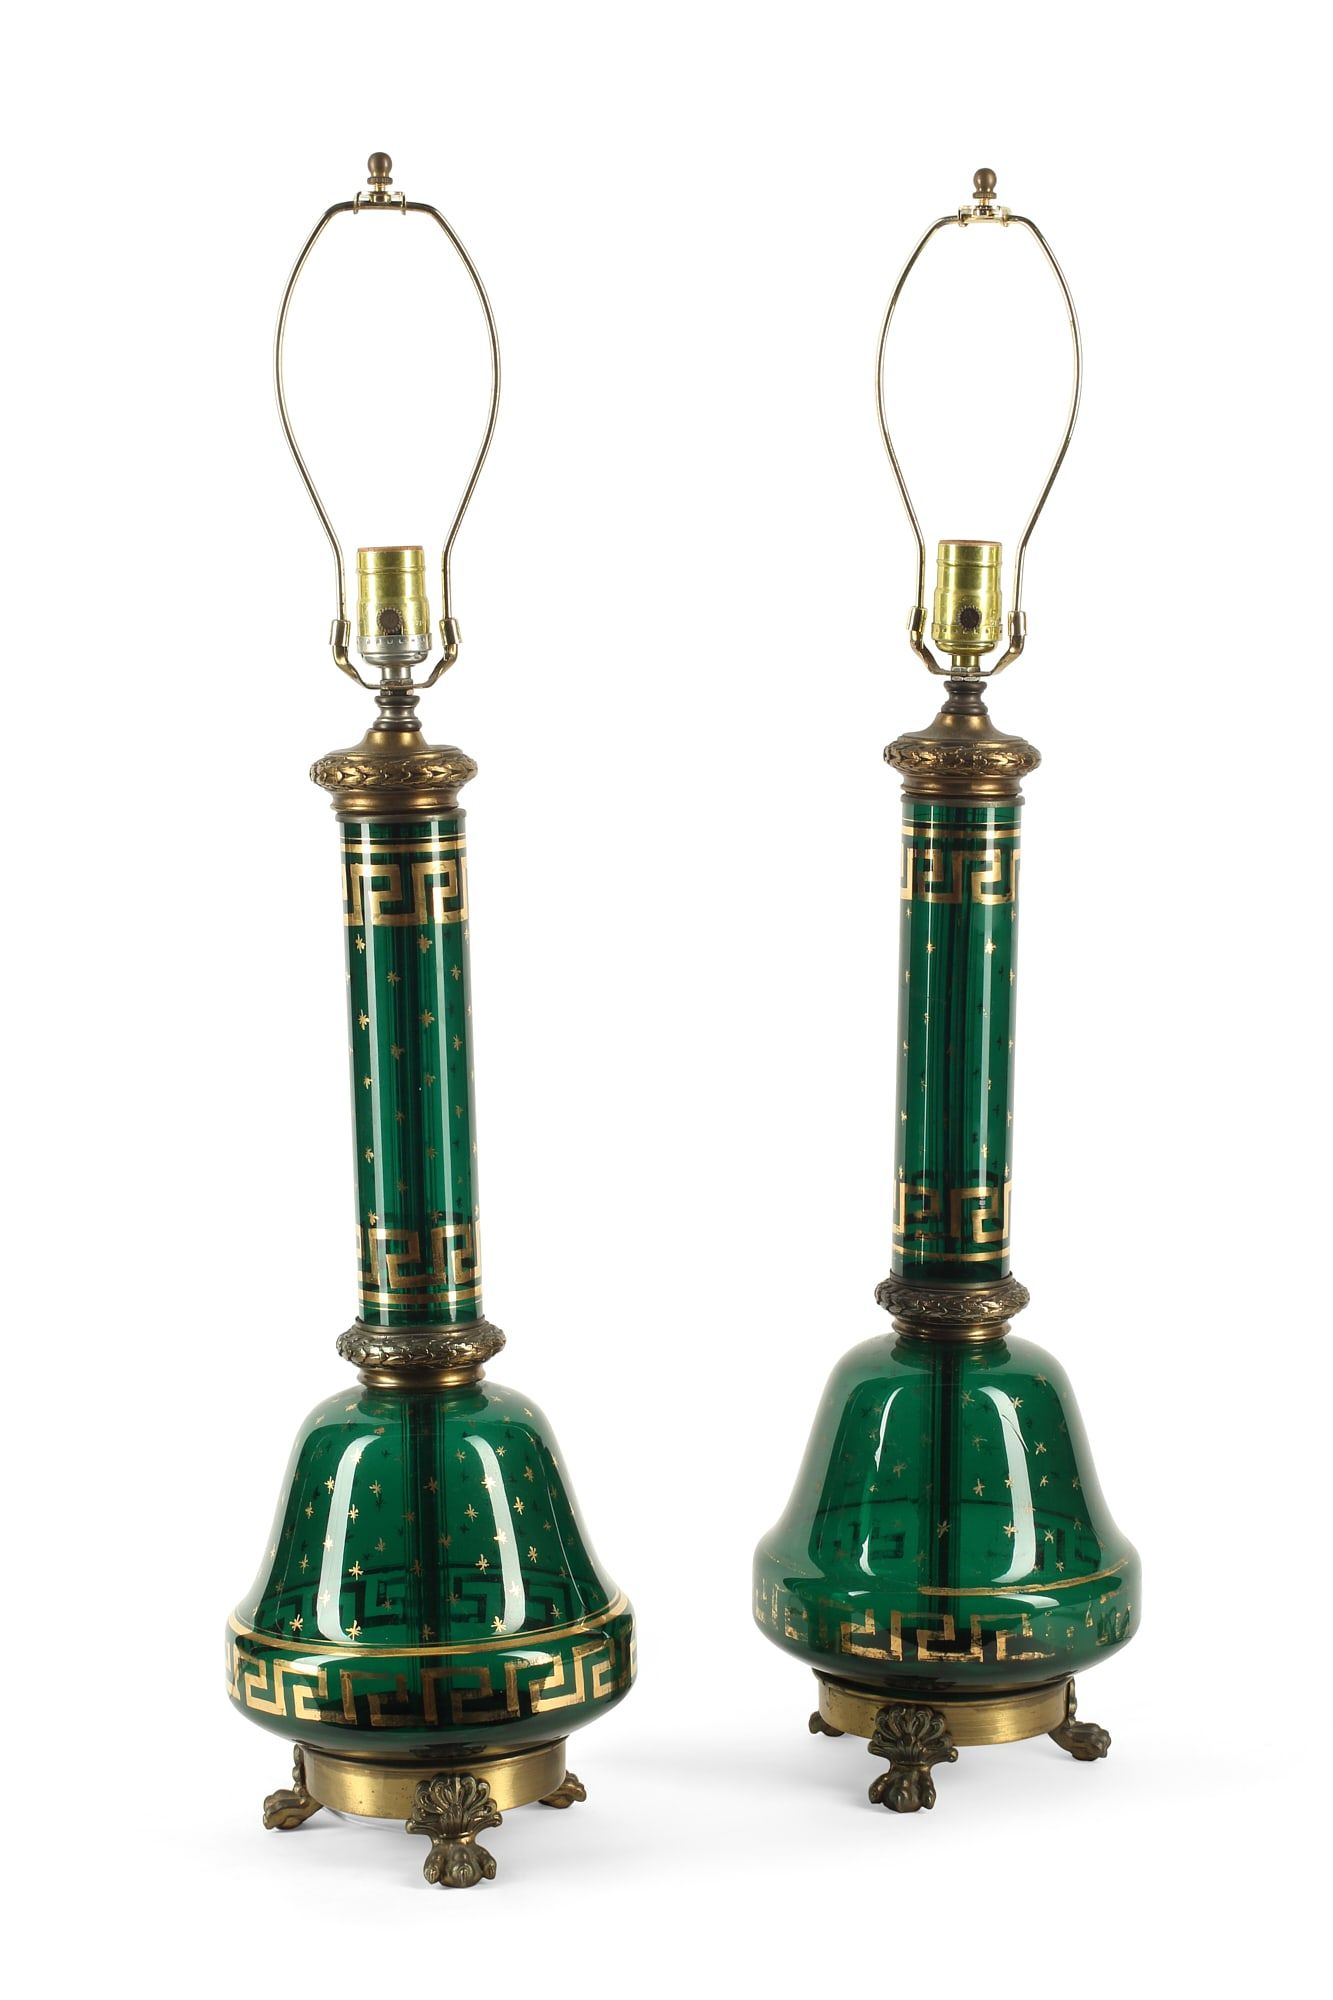 A PAIR OF NEOCLASSICAL STYLE GLASS